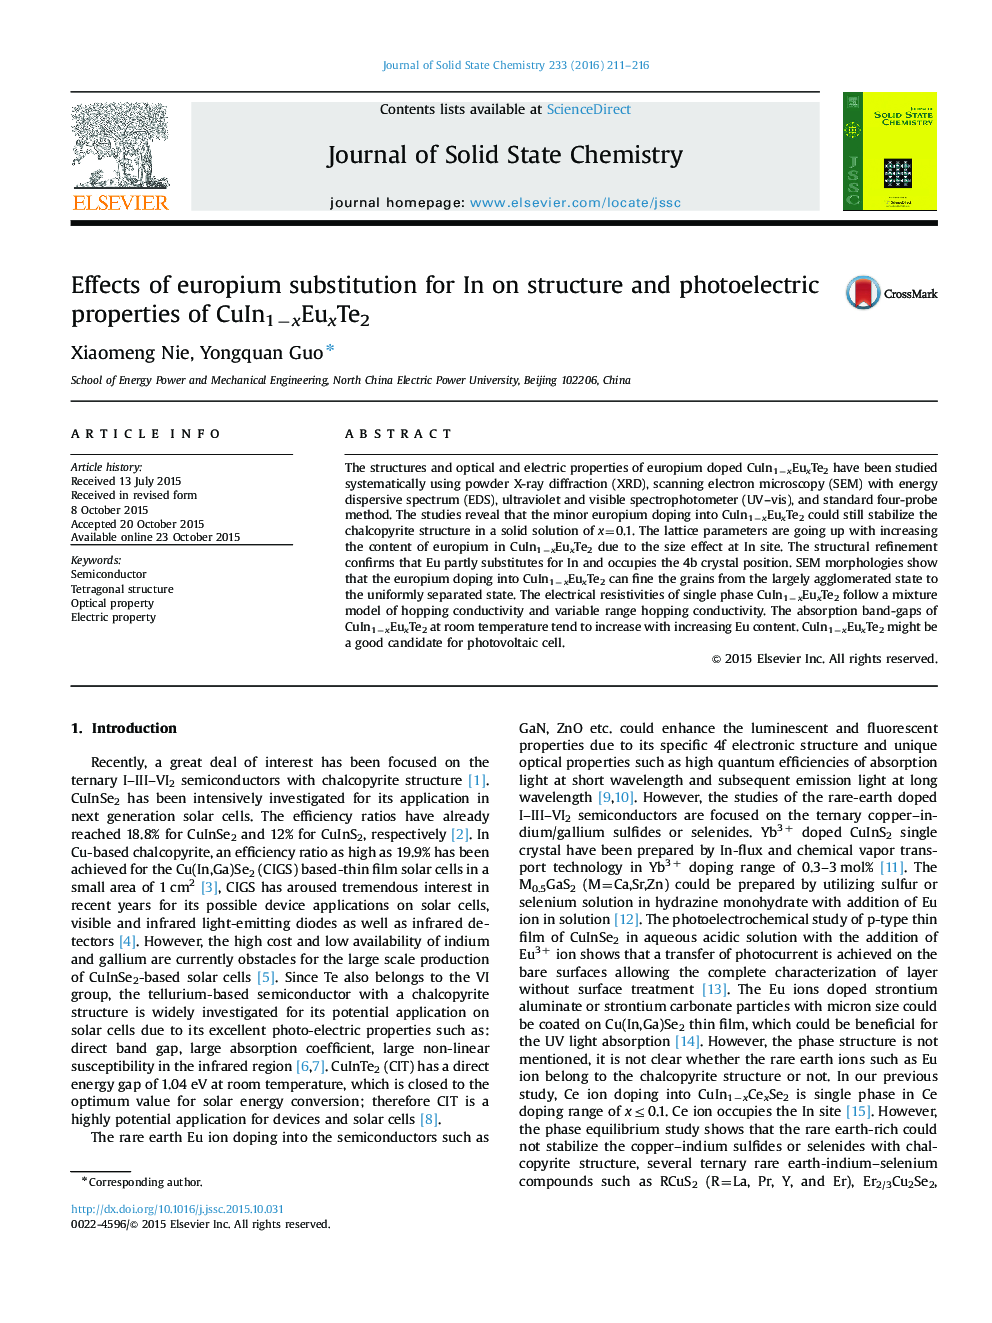 Effects of europium substitution for In on structure and photoelectric properties of CuIn1−xEuxTe2